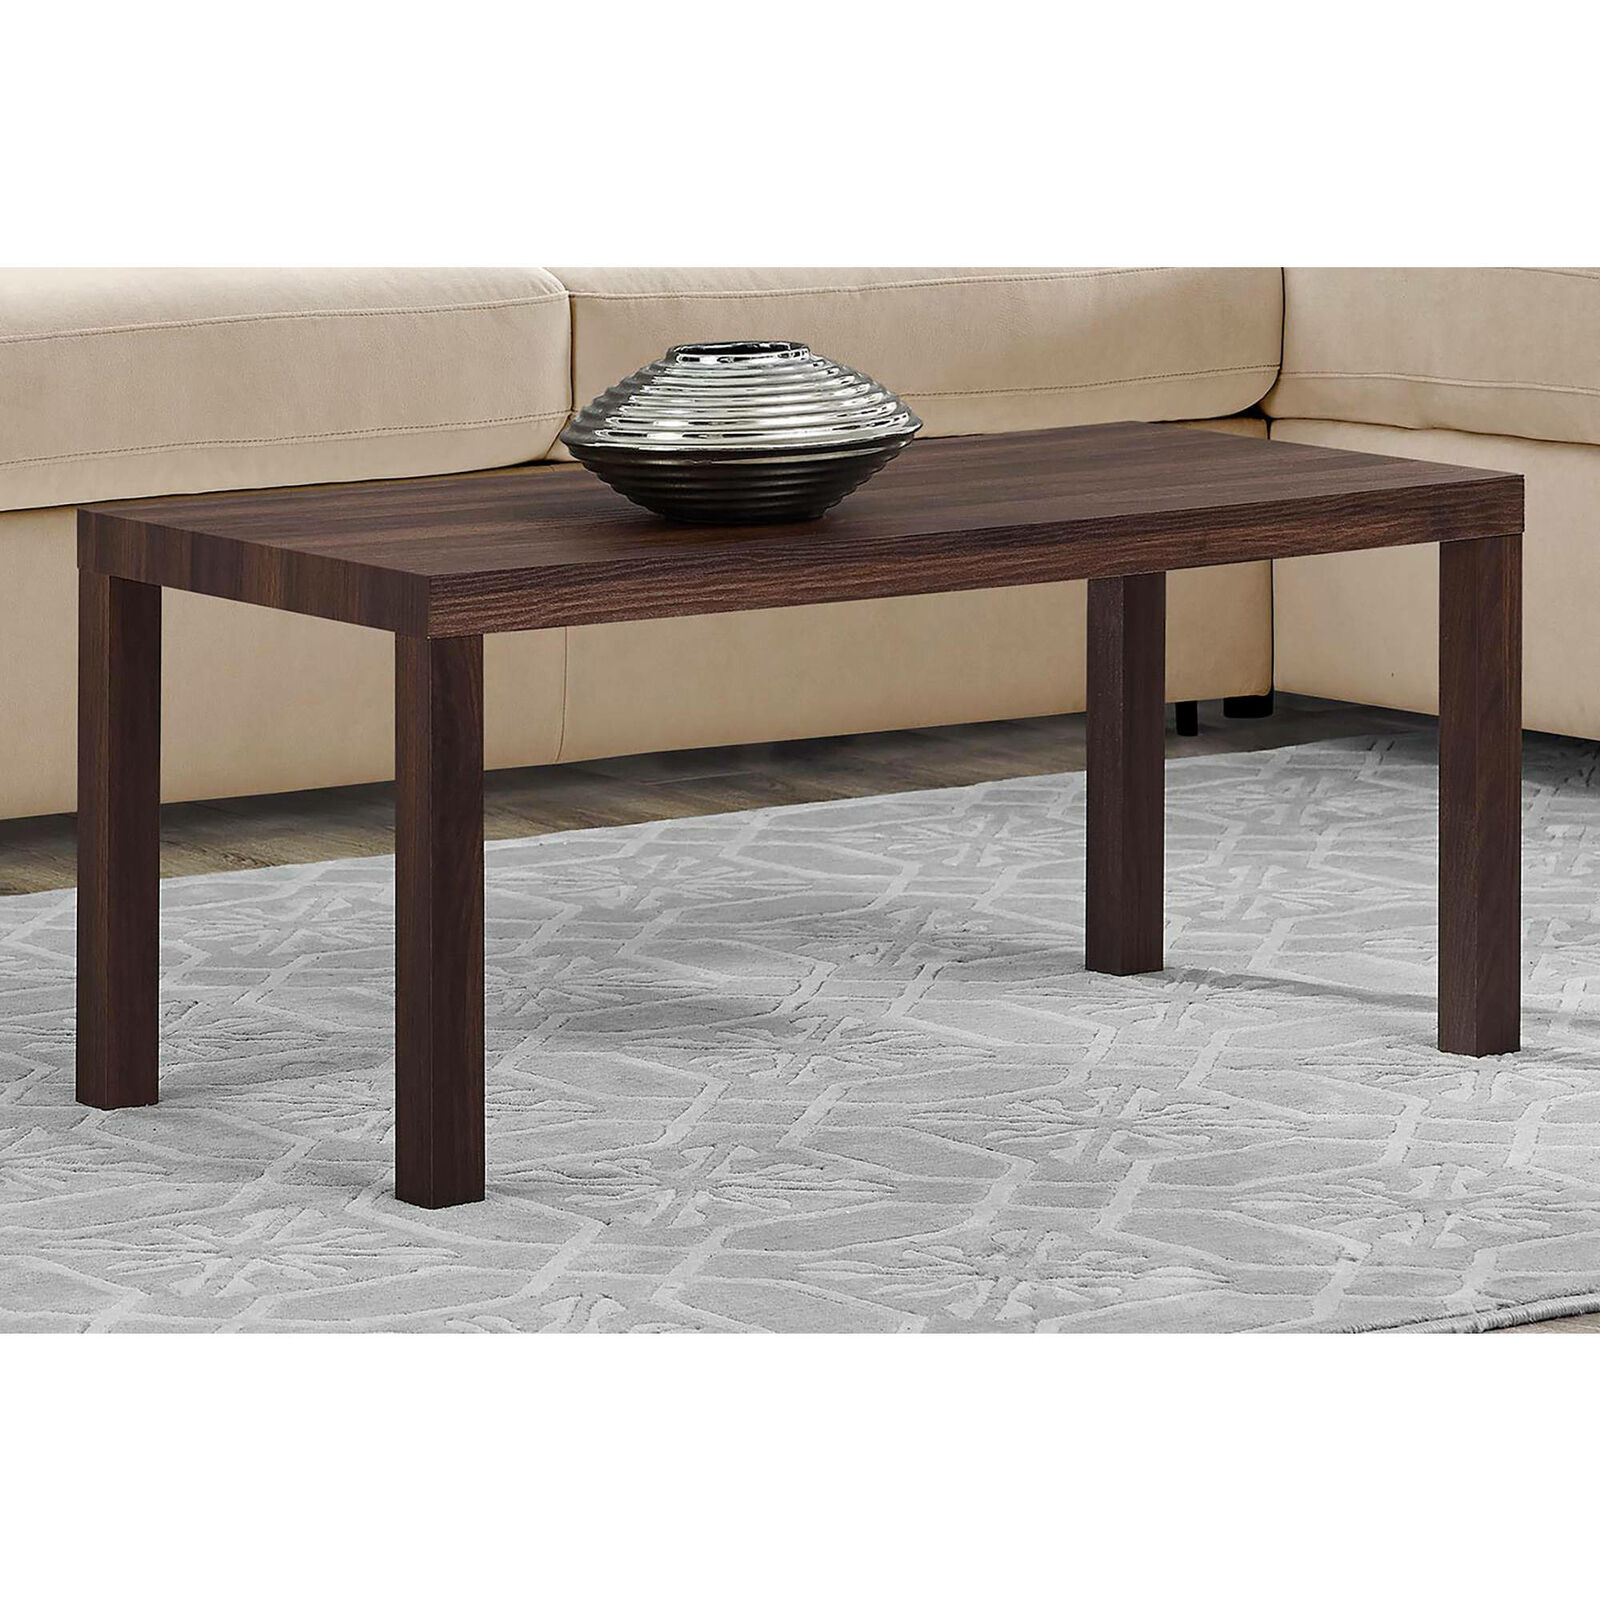 mainstays parsons coffee table lightweight multiple colors for end espresso ashley furniture year warranty extra wide nightstands dining combined stanley direct what color tables